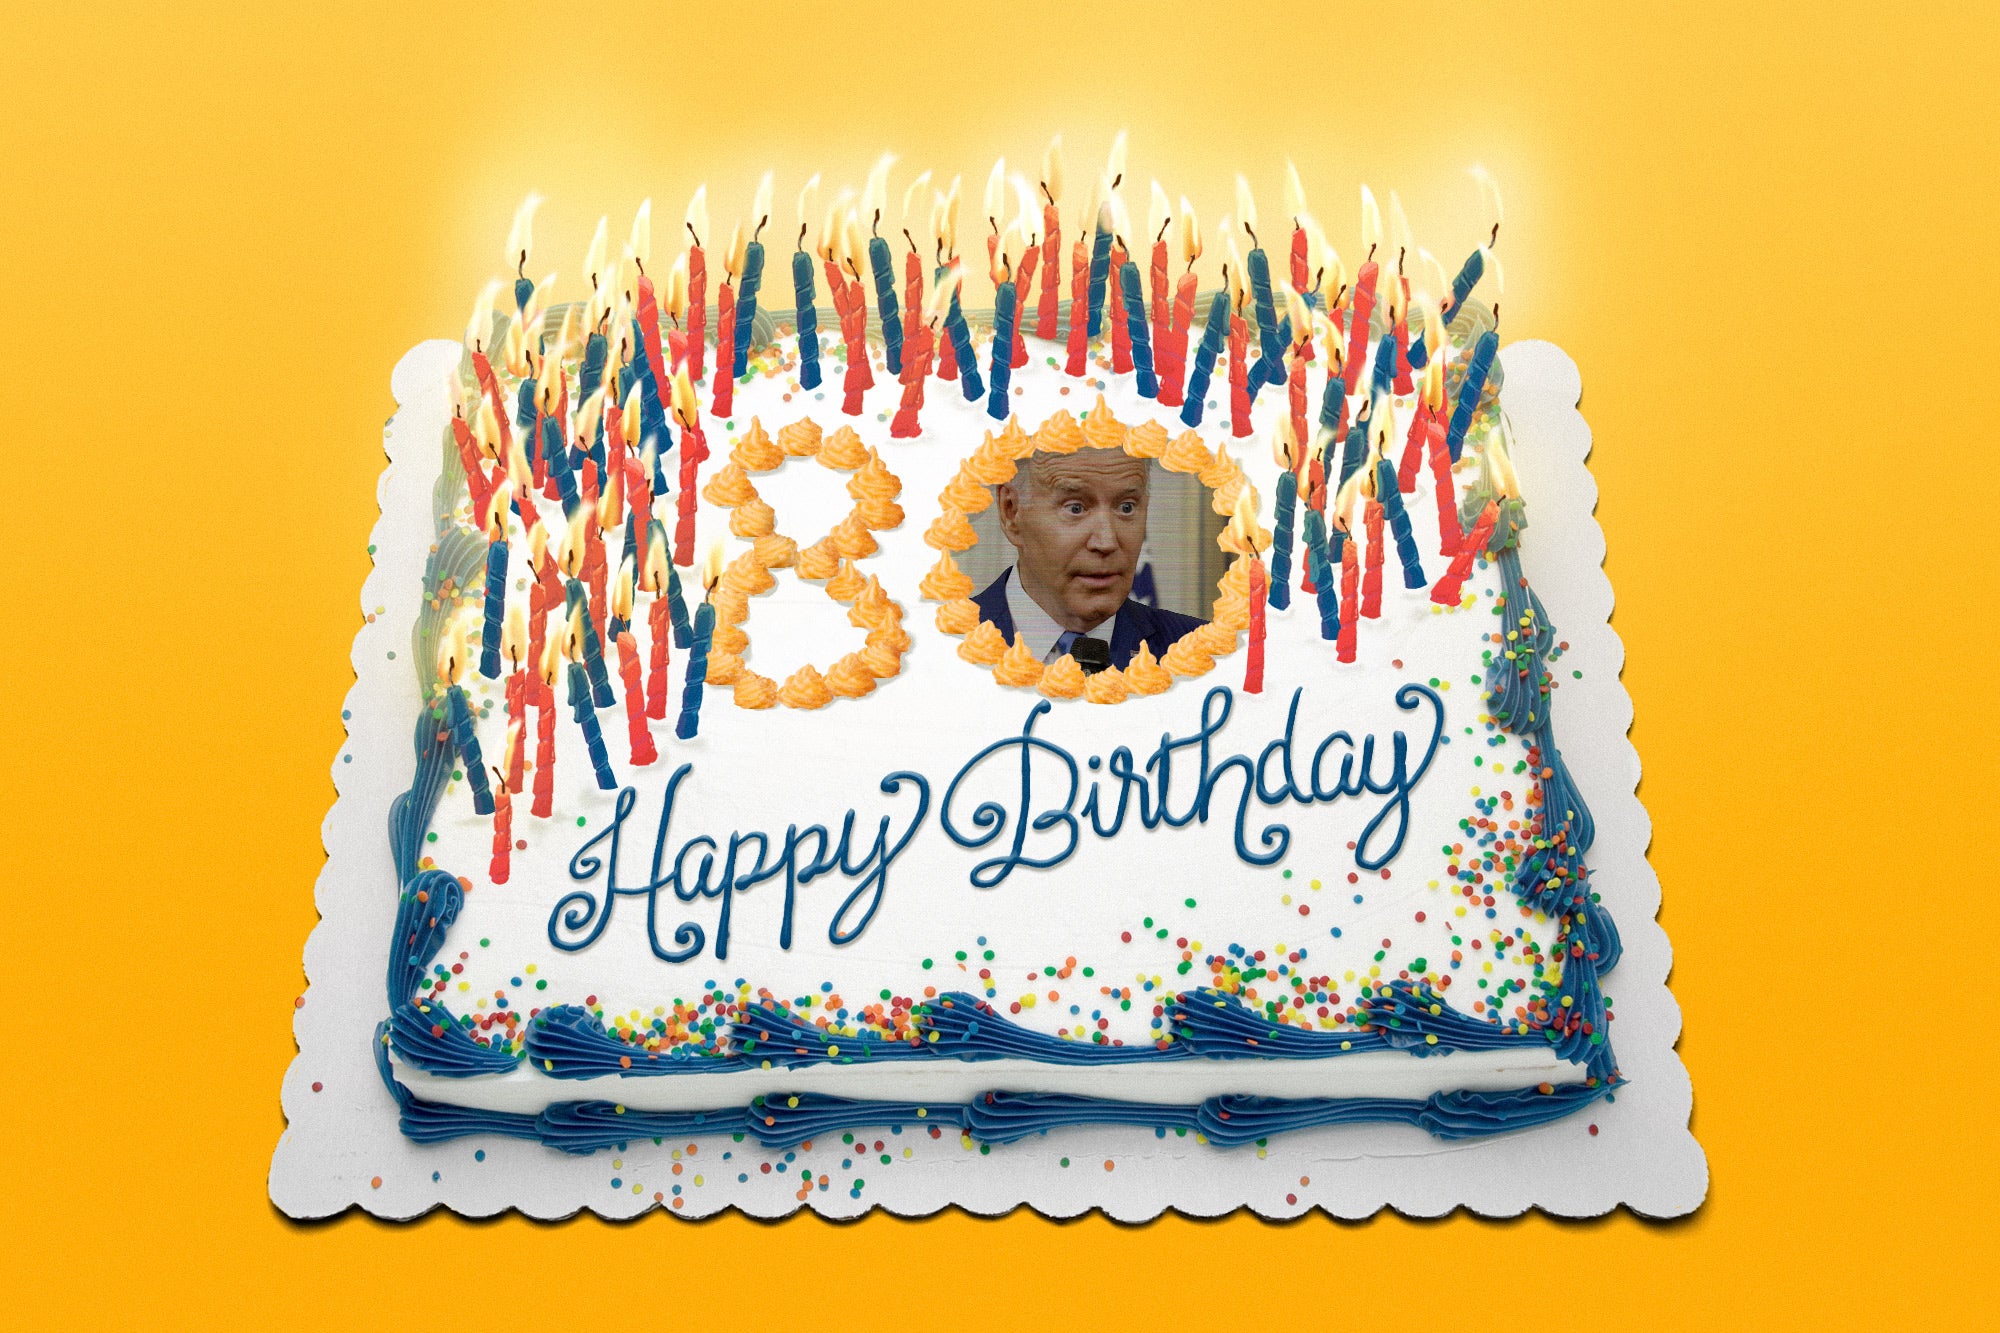 A birthday cake with 80 candles that says Happy Birthday and features a picture of Joe Biden.